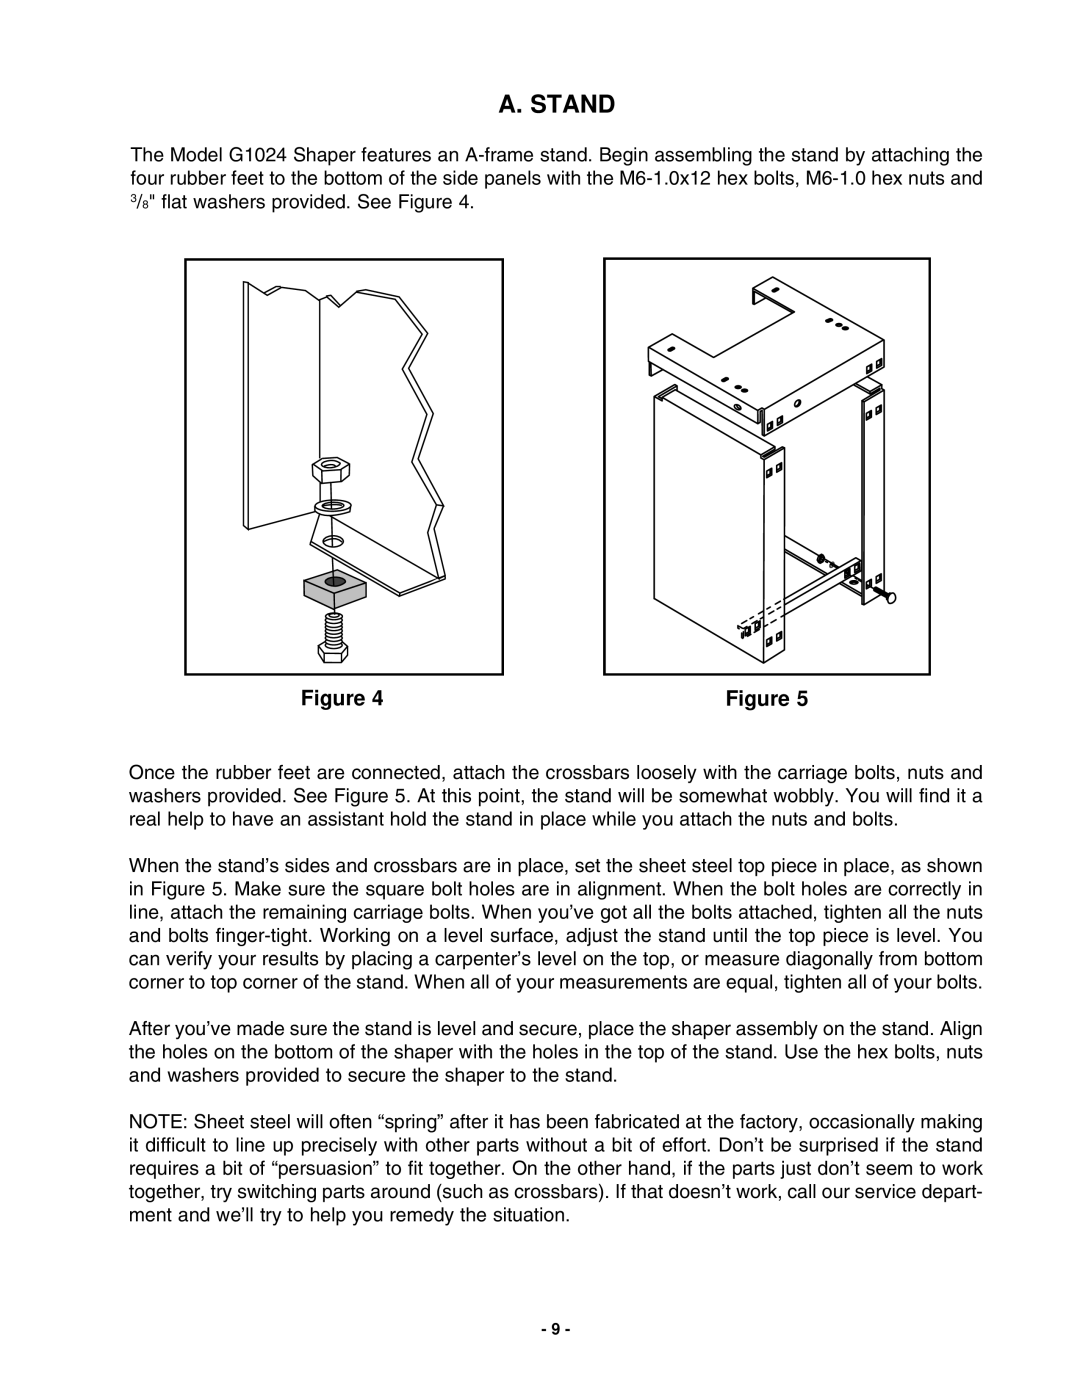 Grizzly G1024 instruction manual A. Stand 